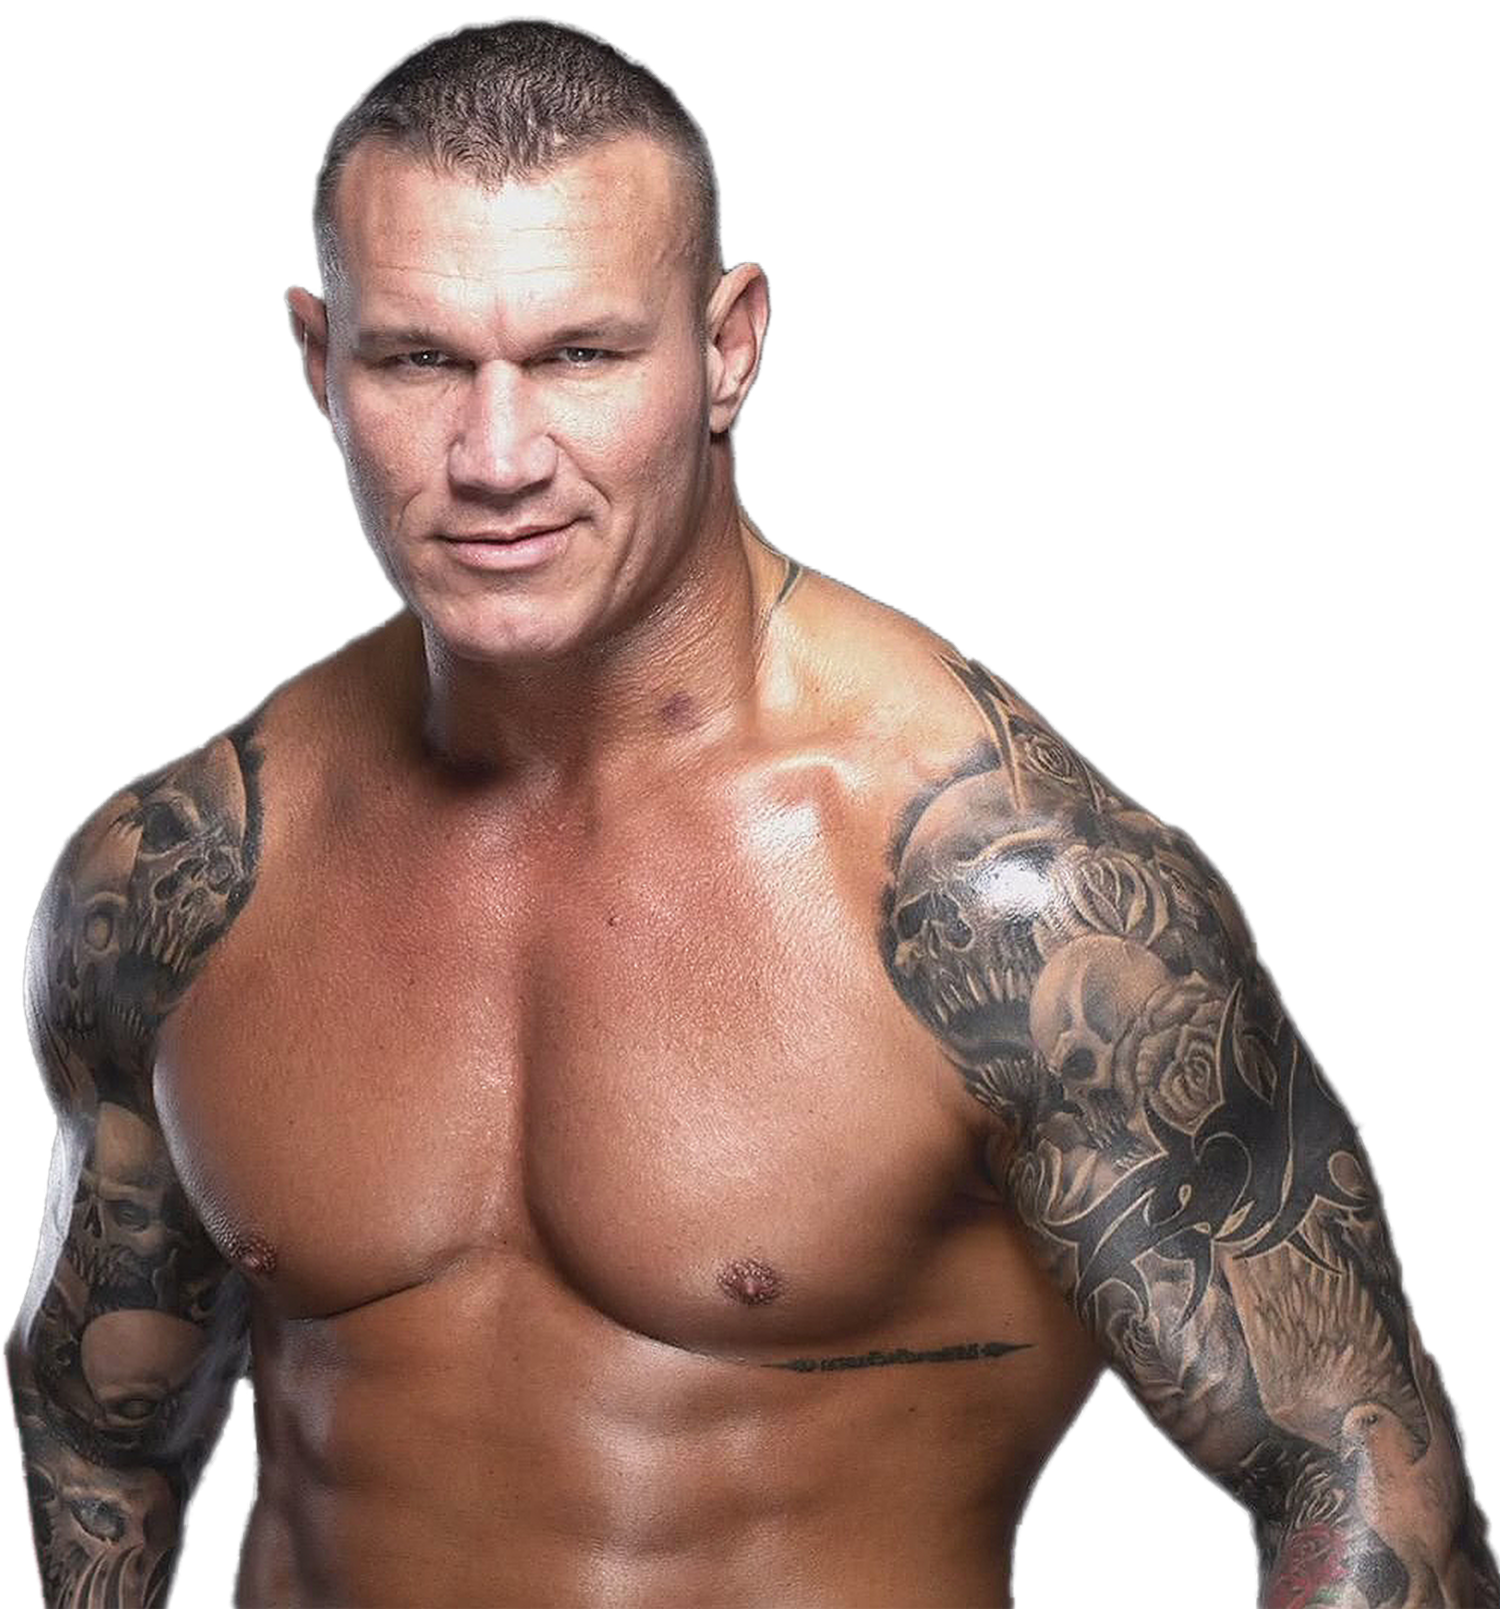 All Randy Orton Wrestling Action Figures